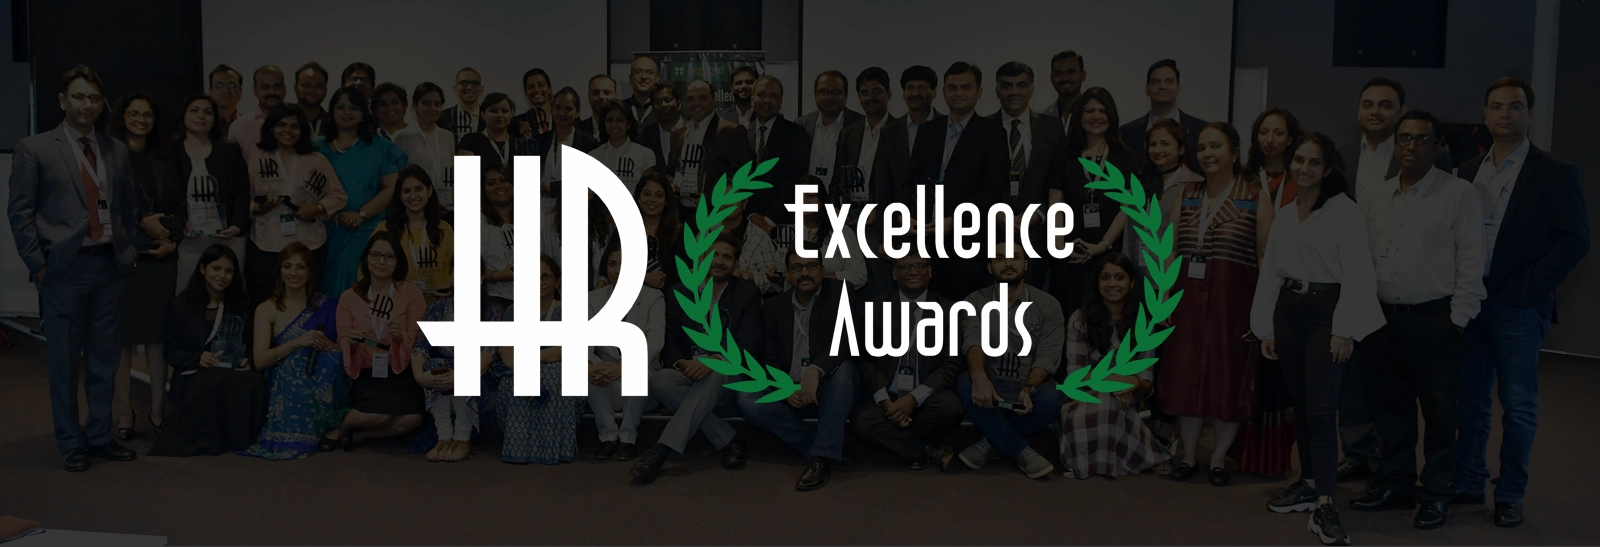 PeopleFirst HR Excellence Awards